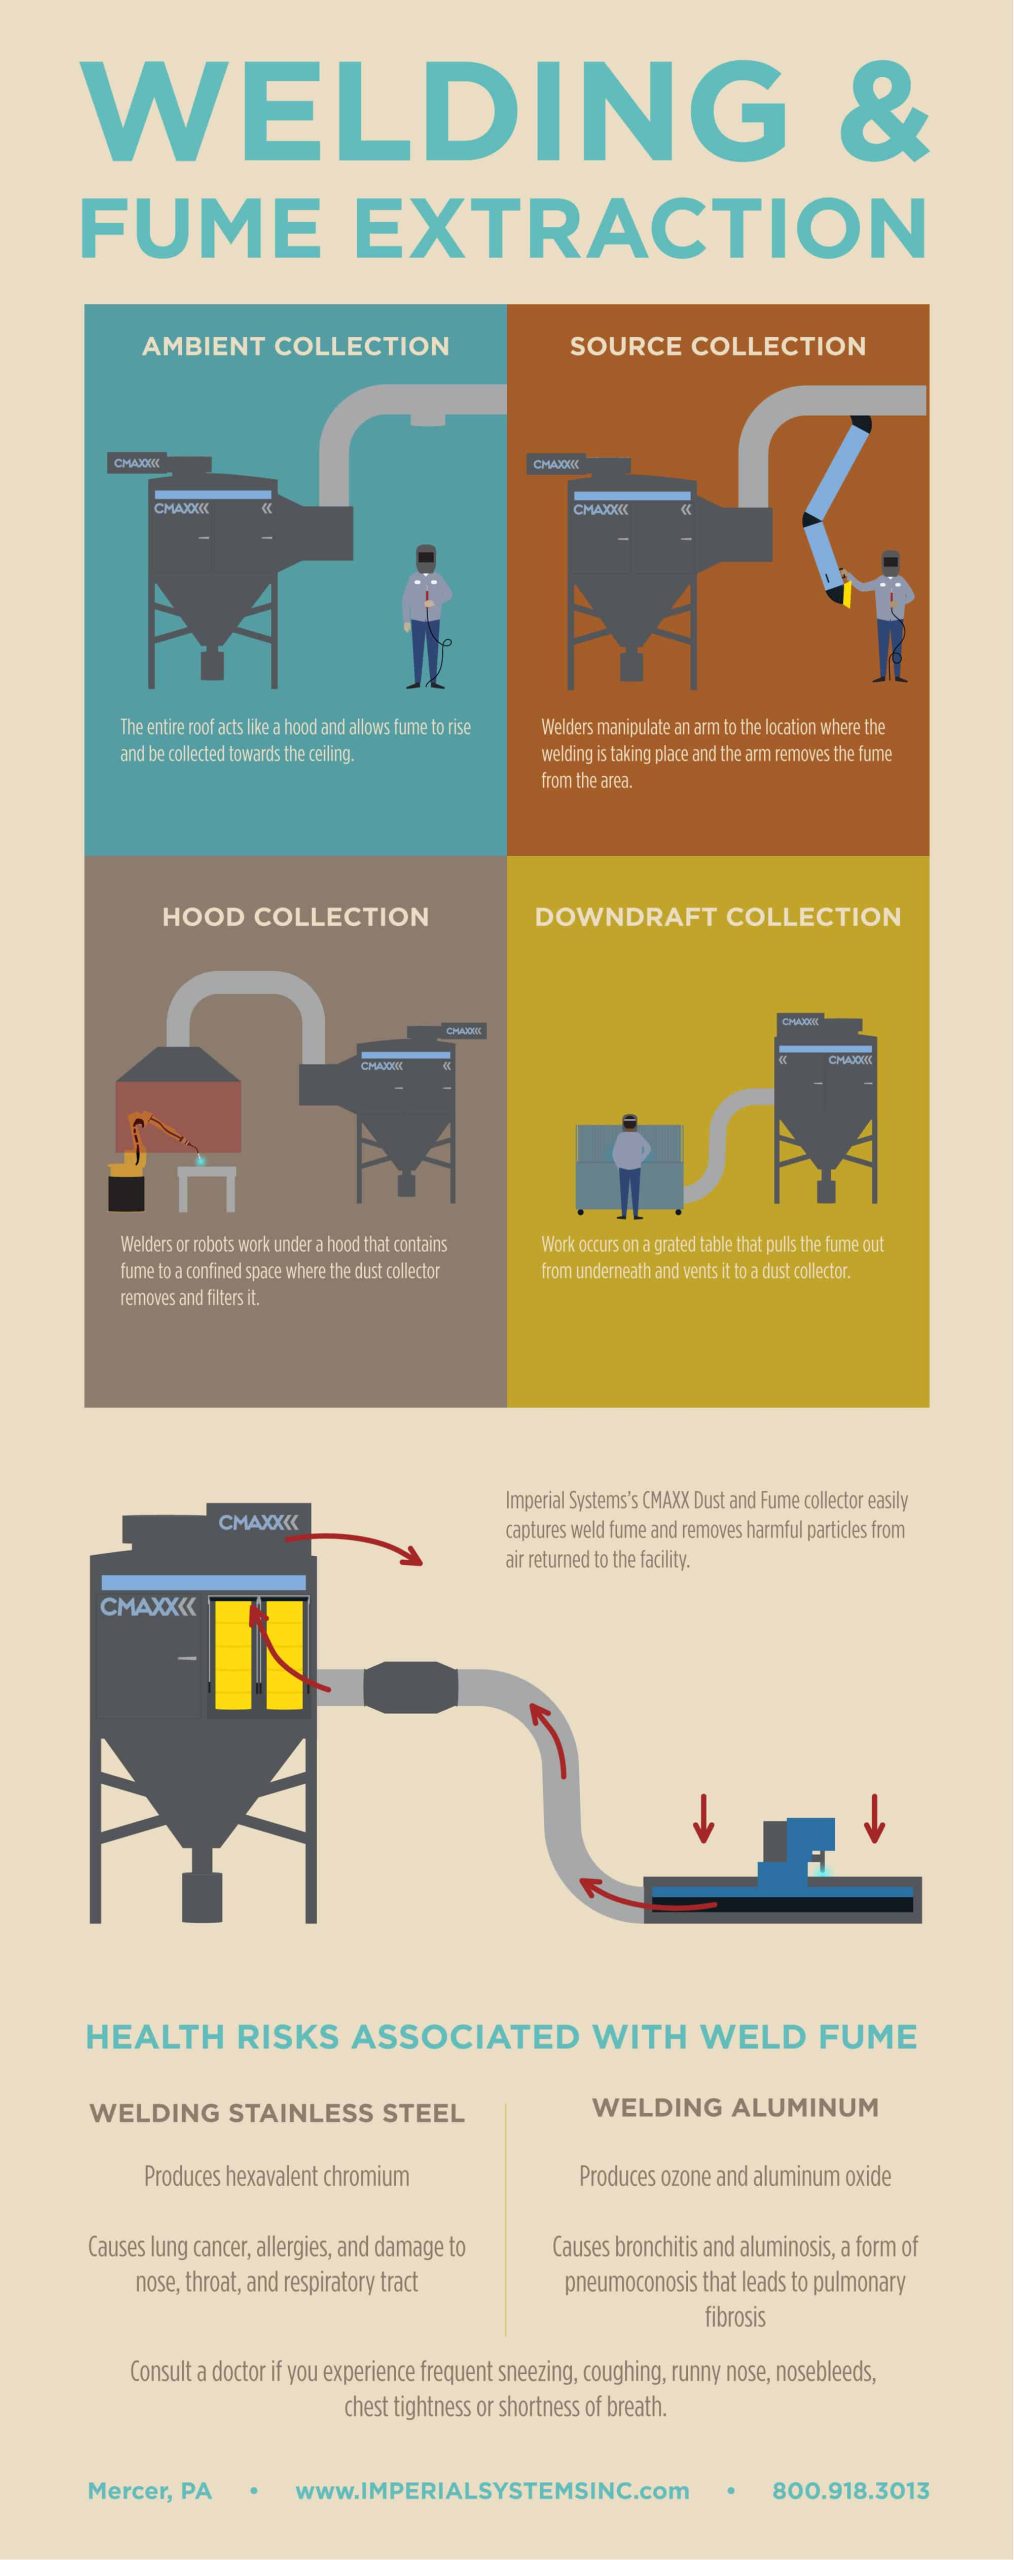 This weld fume extraction guide shows the ways that the CMAXX Dust & Fume Collector can extract weld fume from your facility and keep your employees safe.